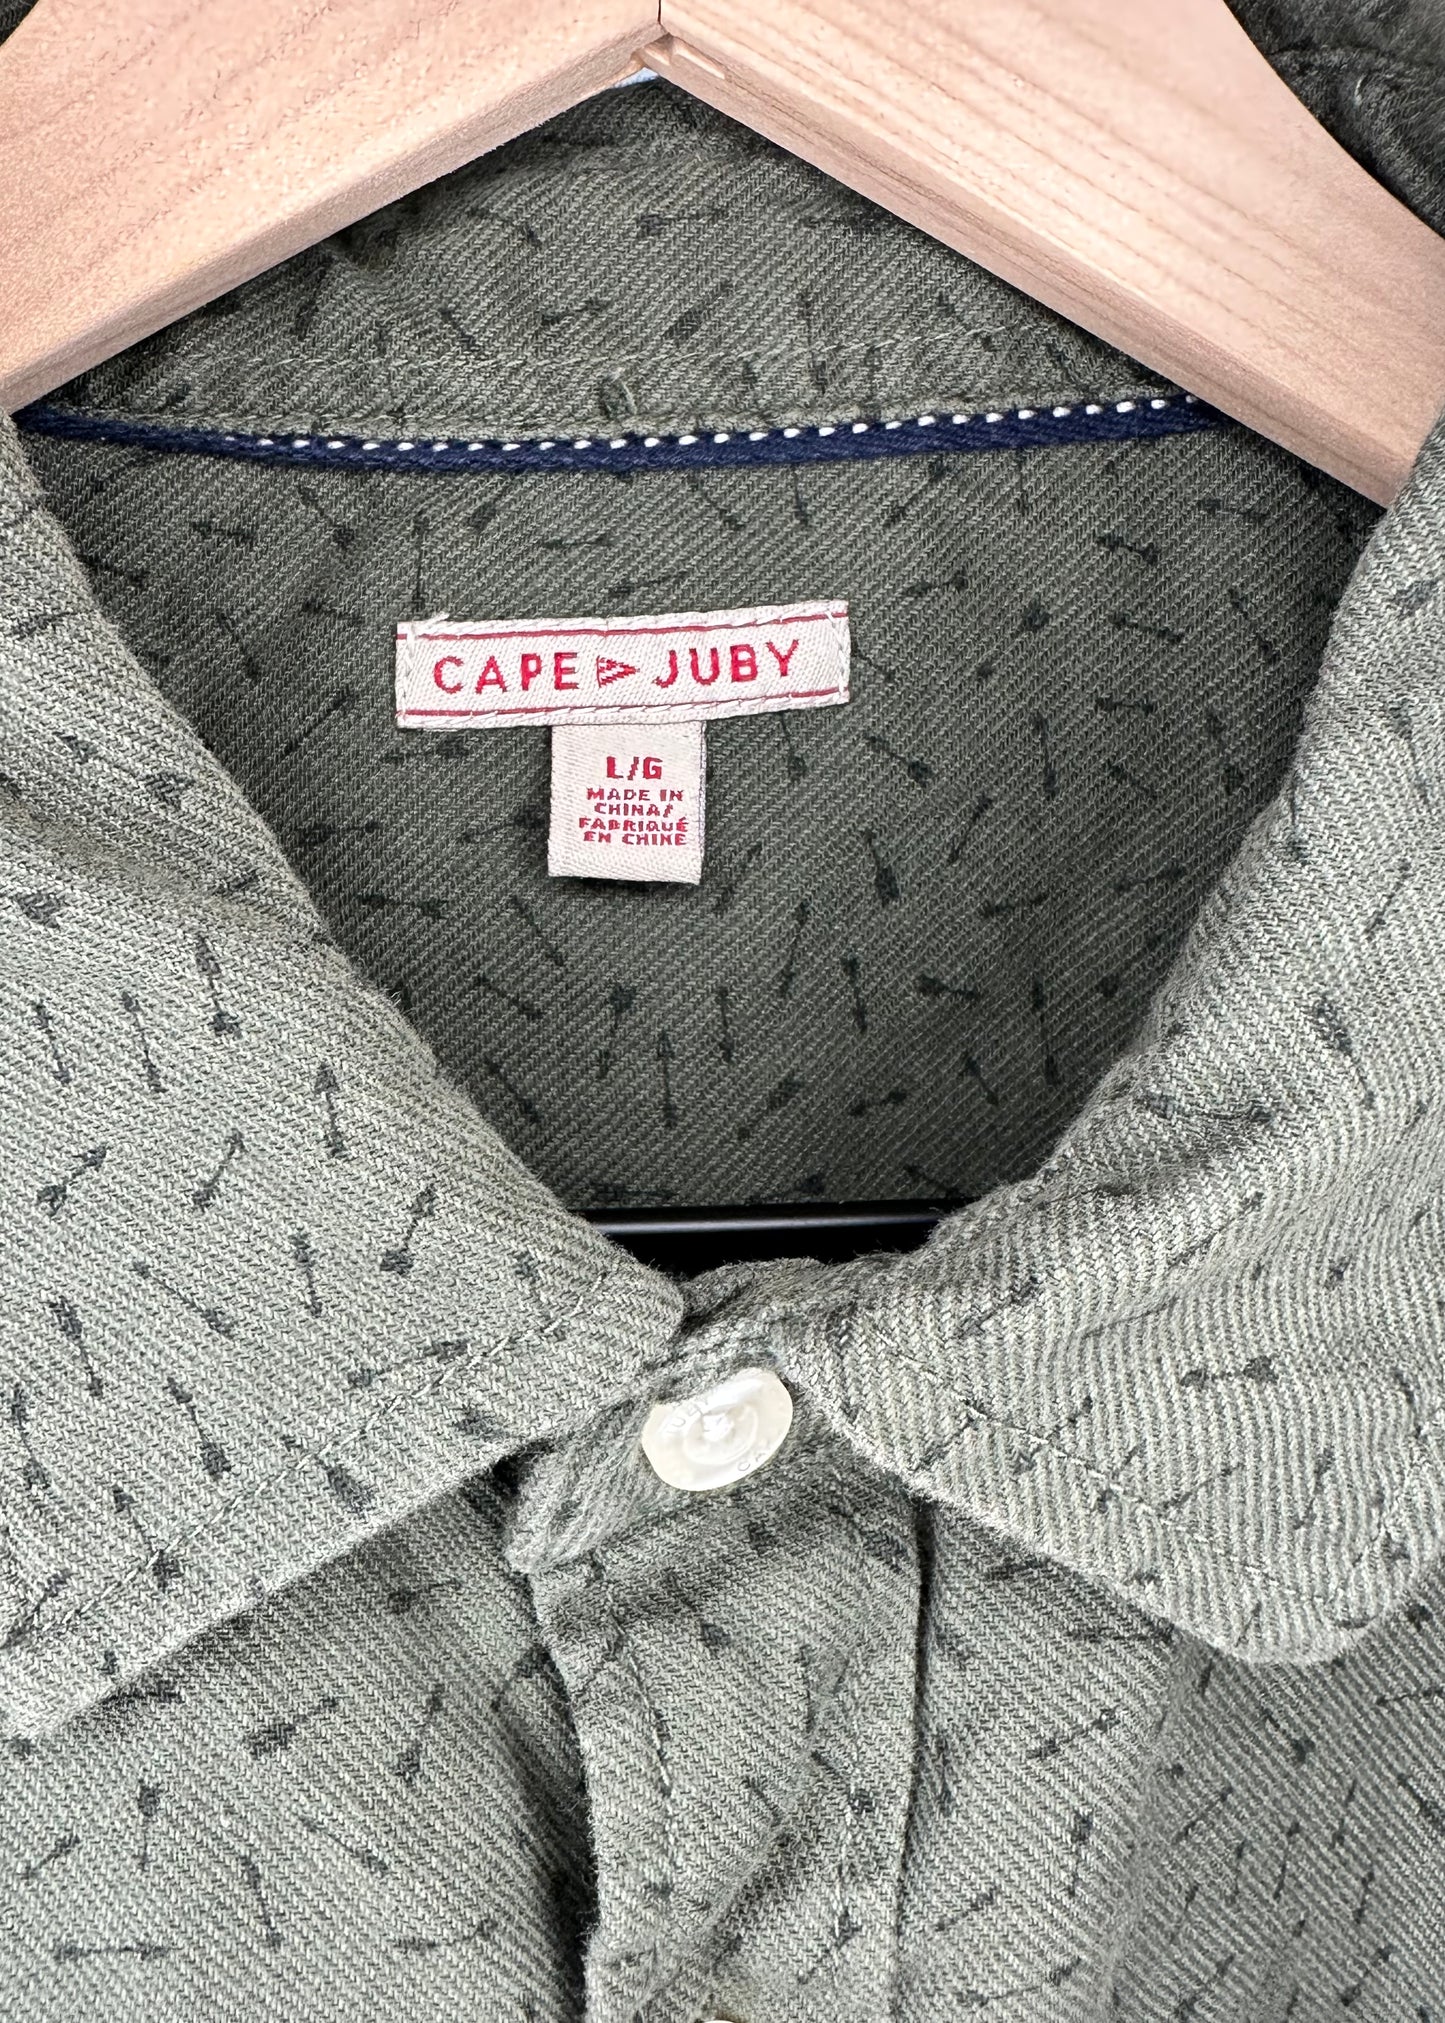 Green Button Up By Cape Juby